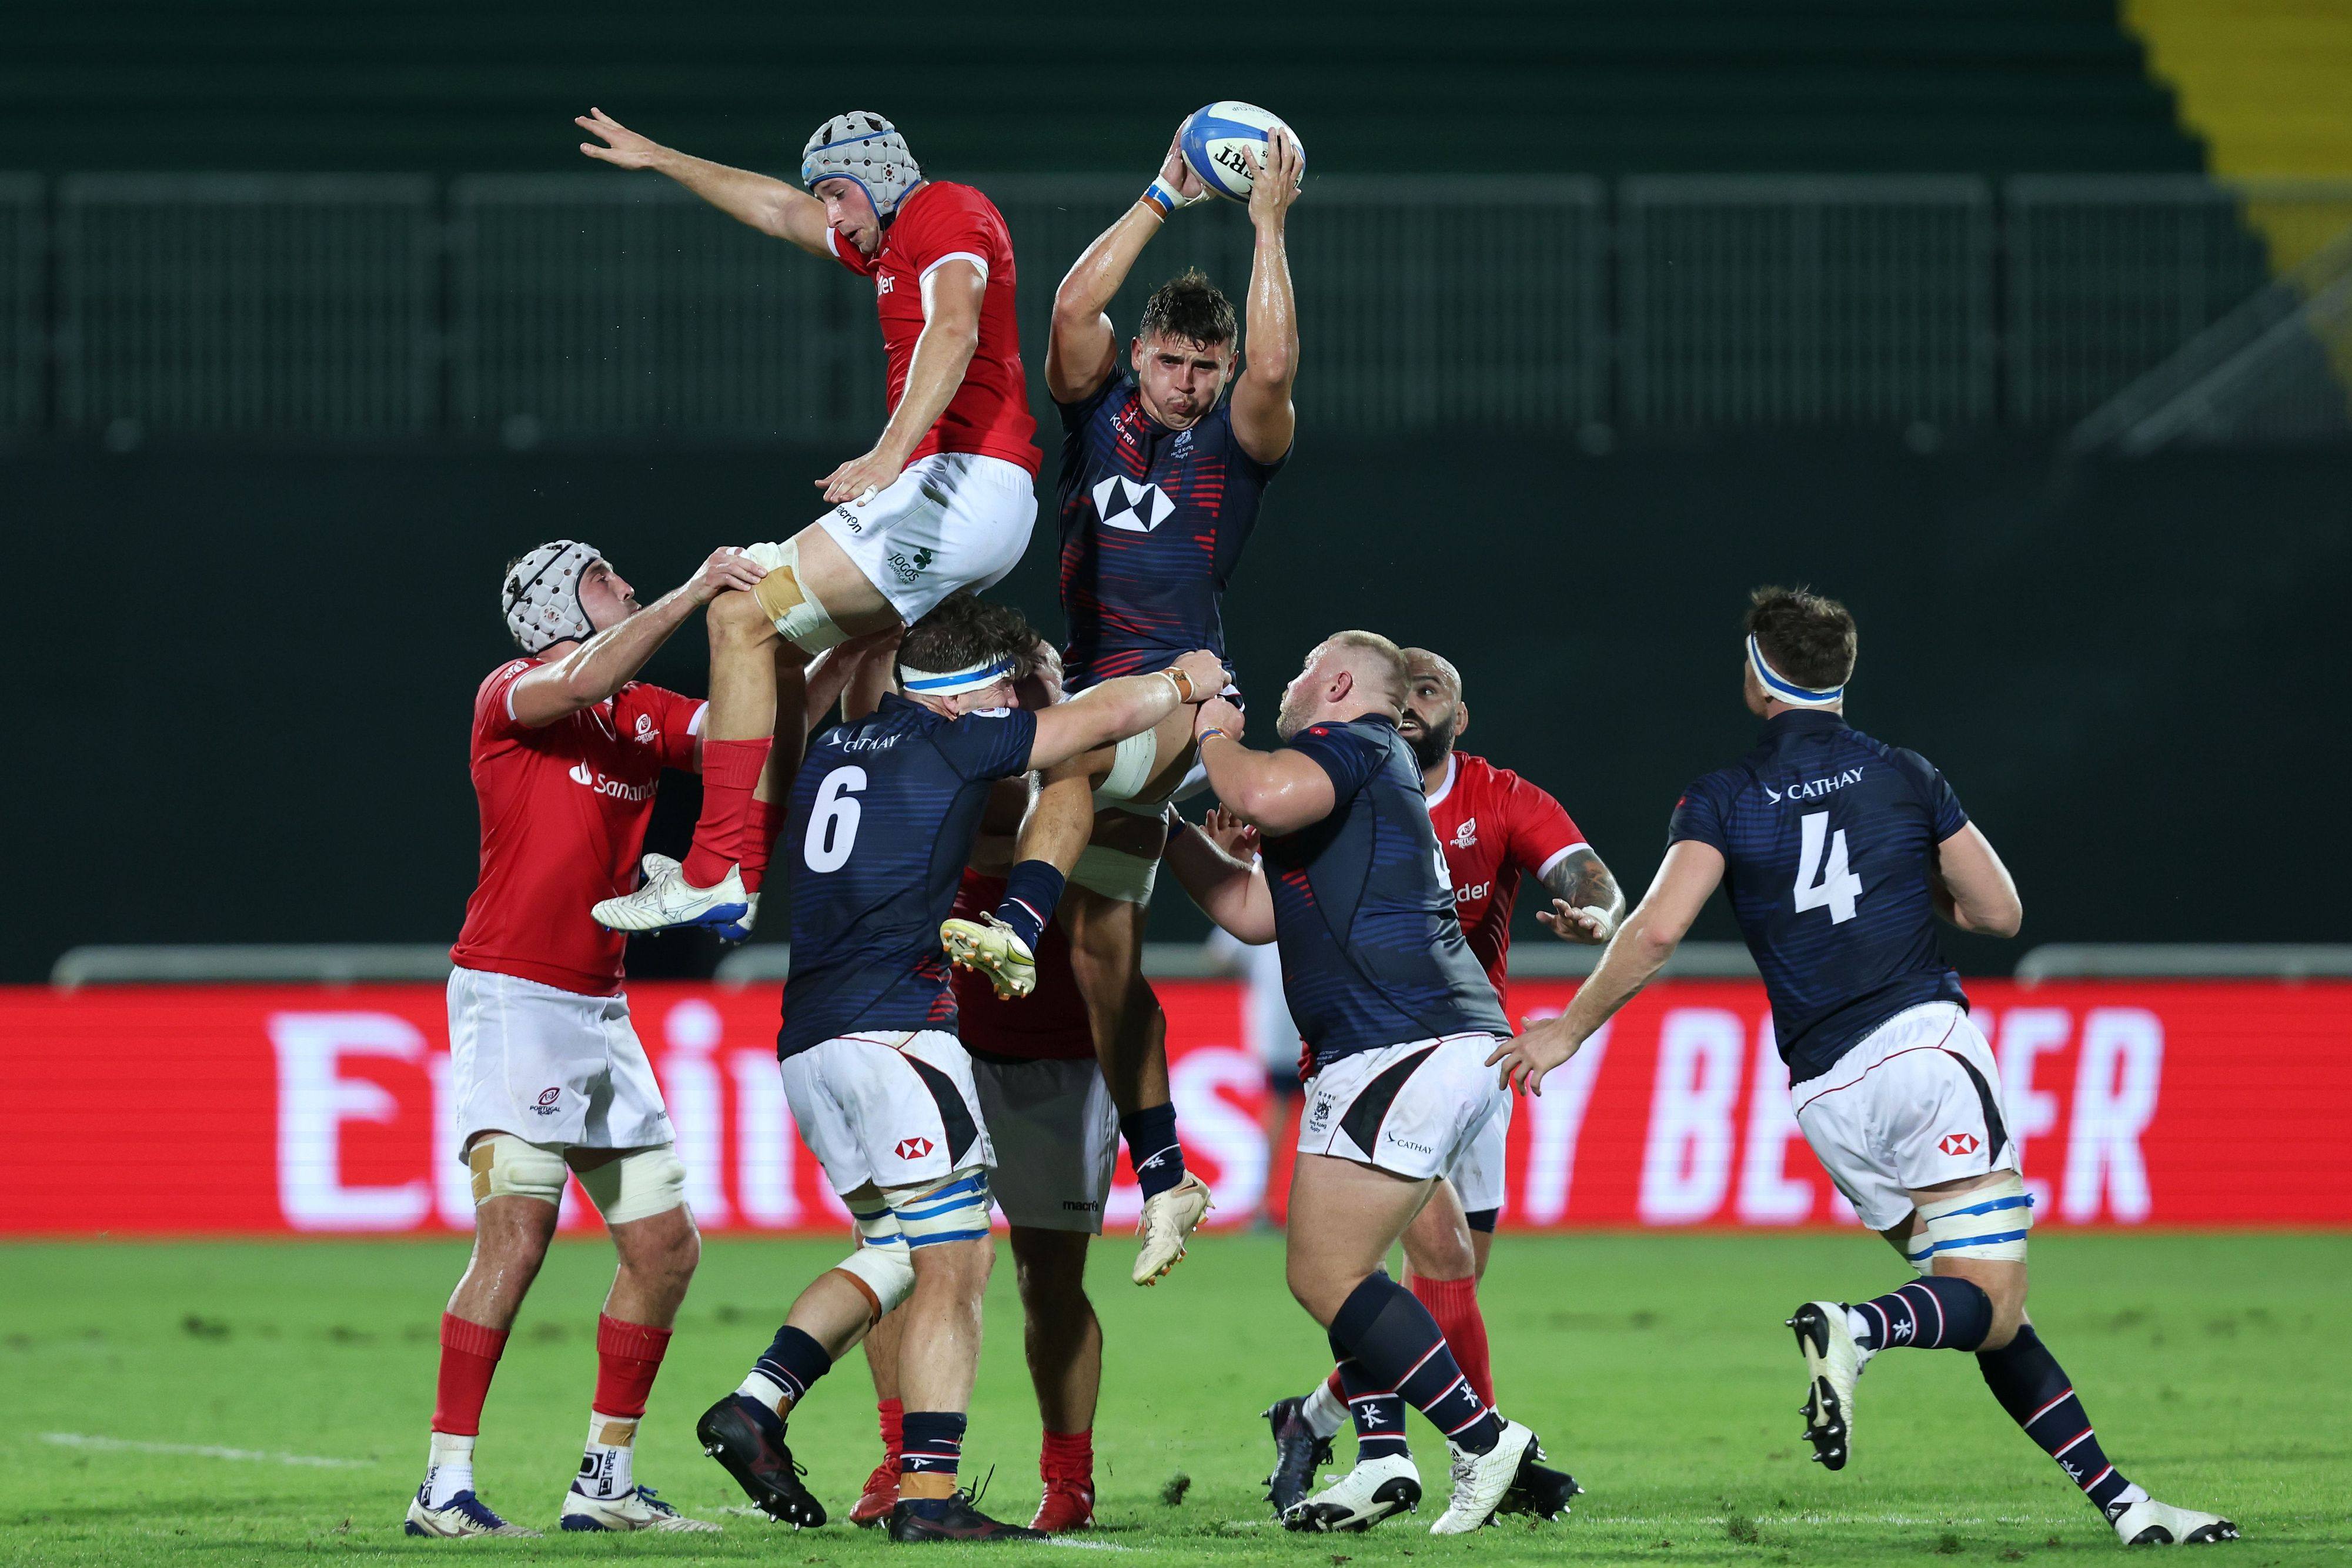 David Carvalho of Portugal loses out to James Sawyer of Hong Kong at the lineout during the RWC 2023 Final Qualifying Tournament. Photo: Christopher Pike/World Rugby via Getty Images